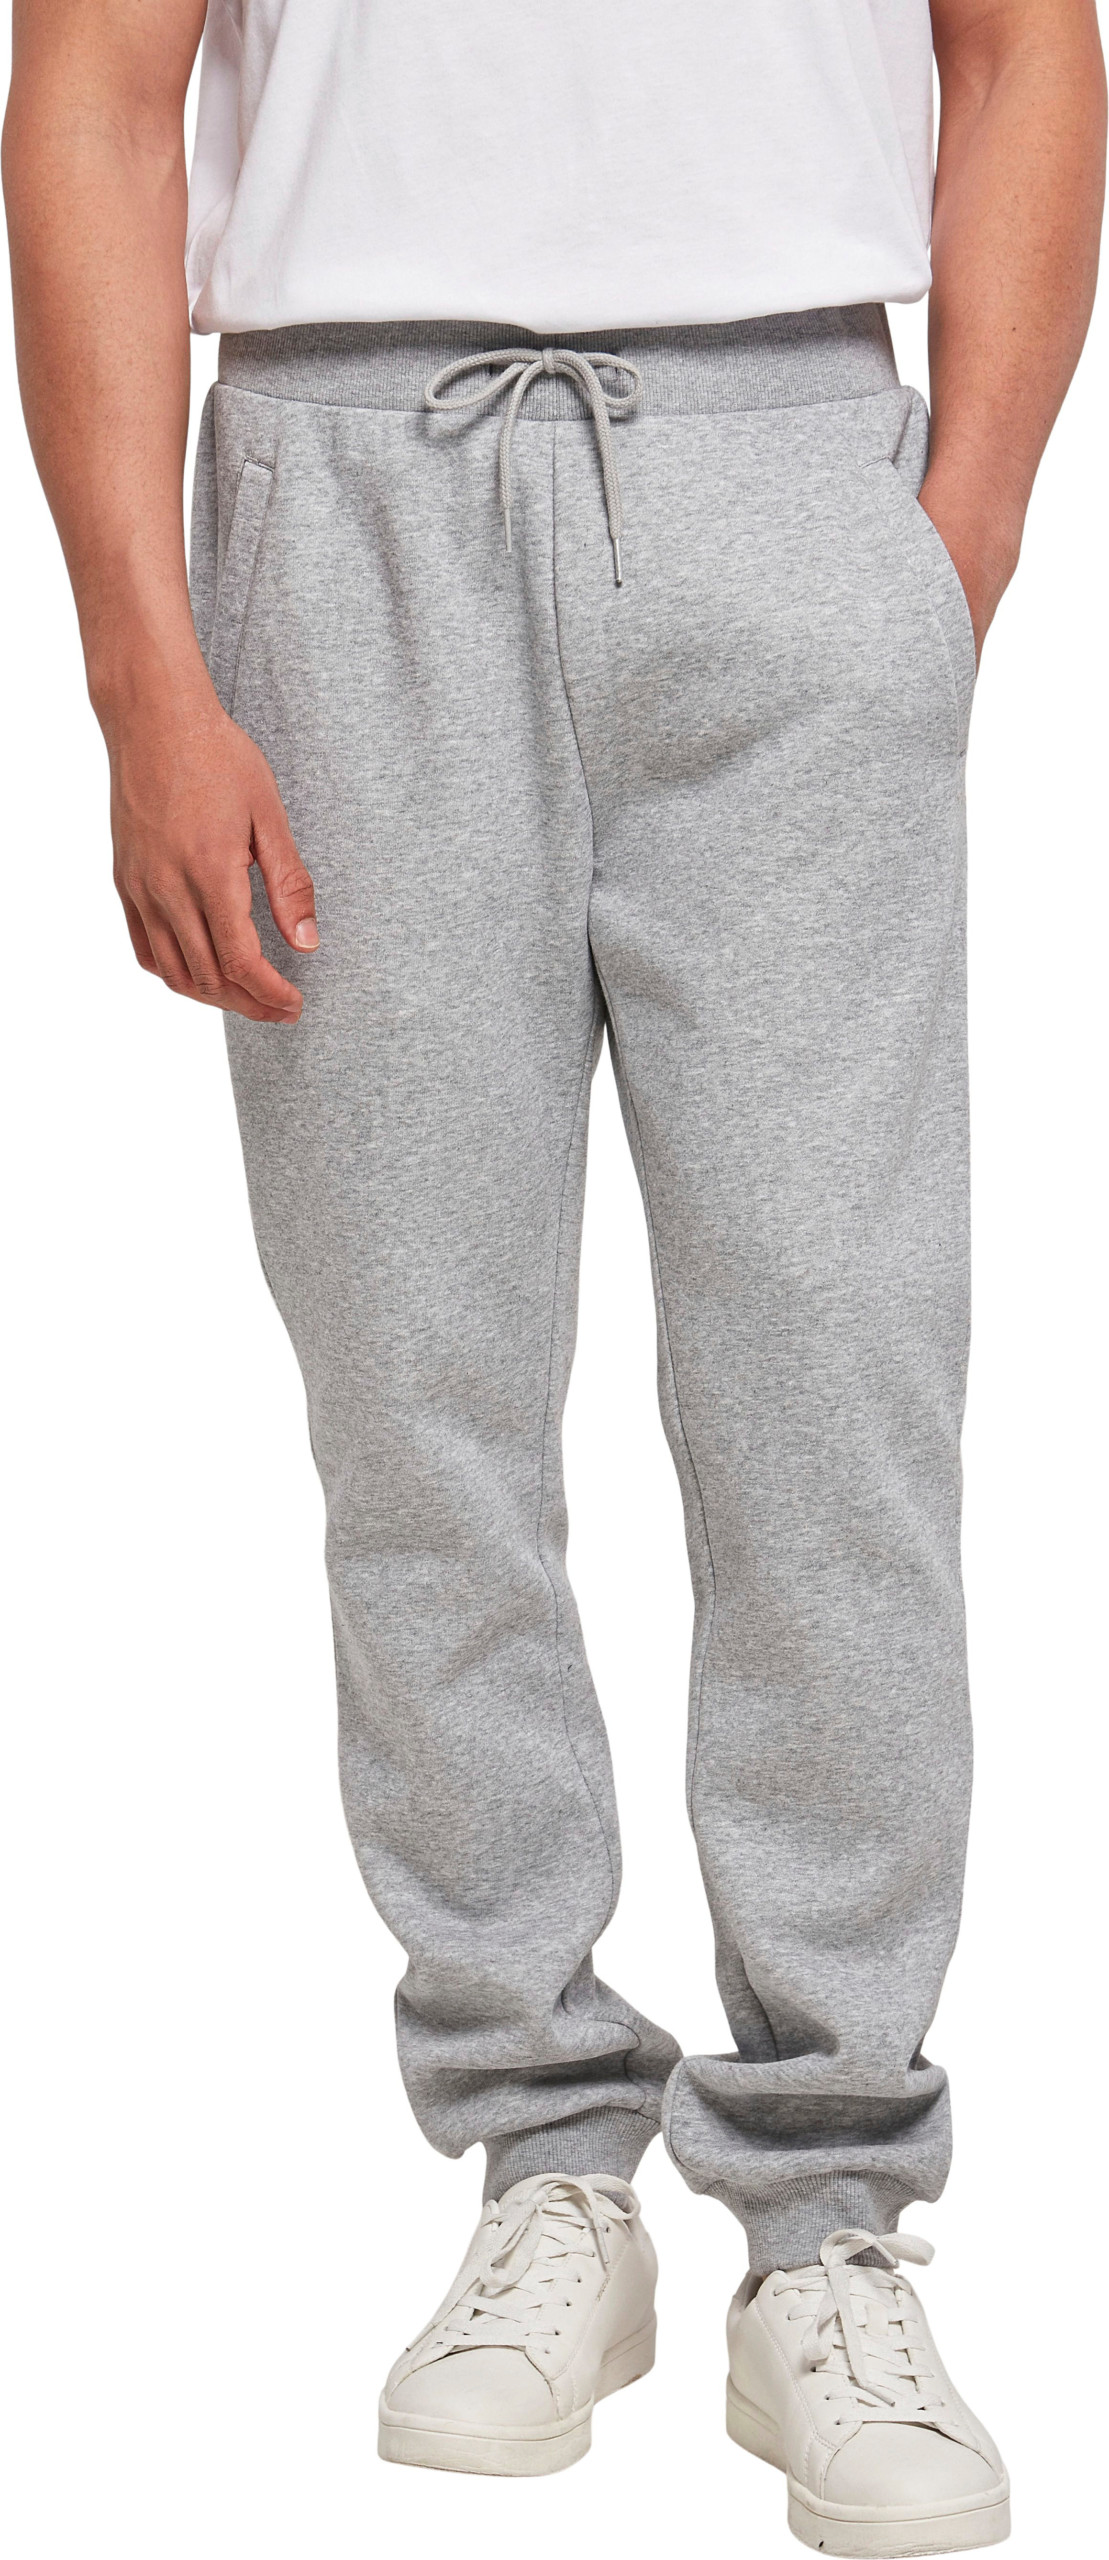 Build Your Brand - Build Your Brand - Organic Basic Sweatpants - BY174